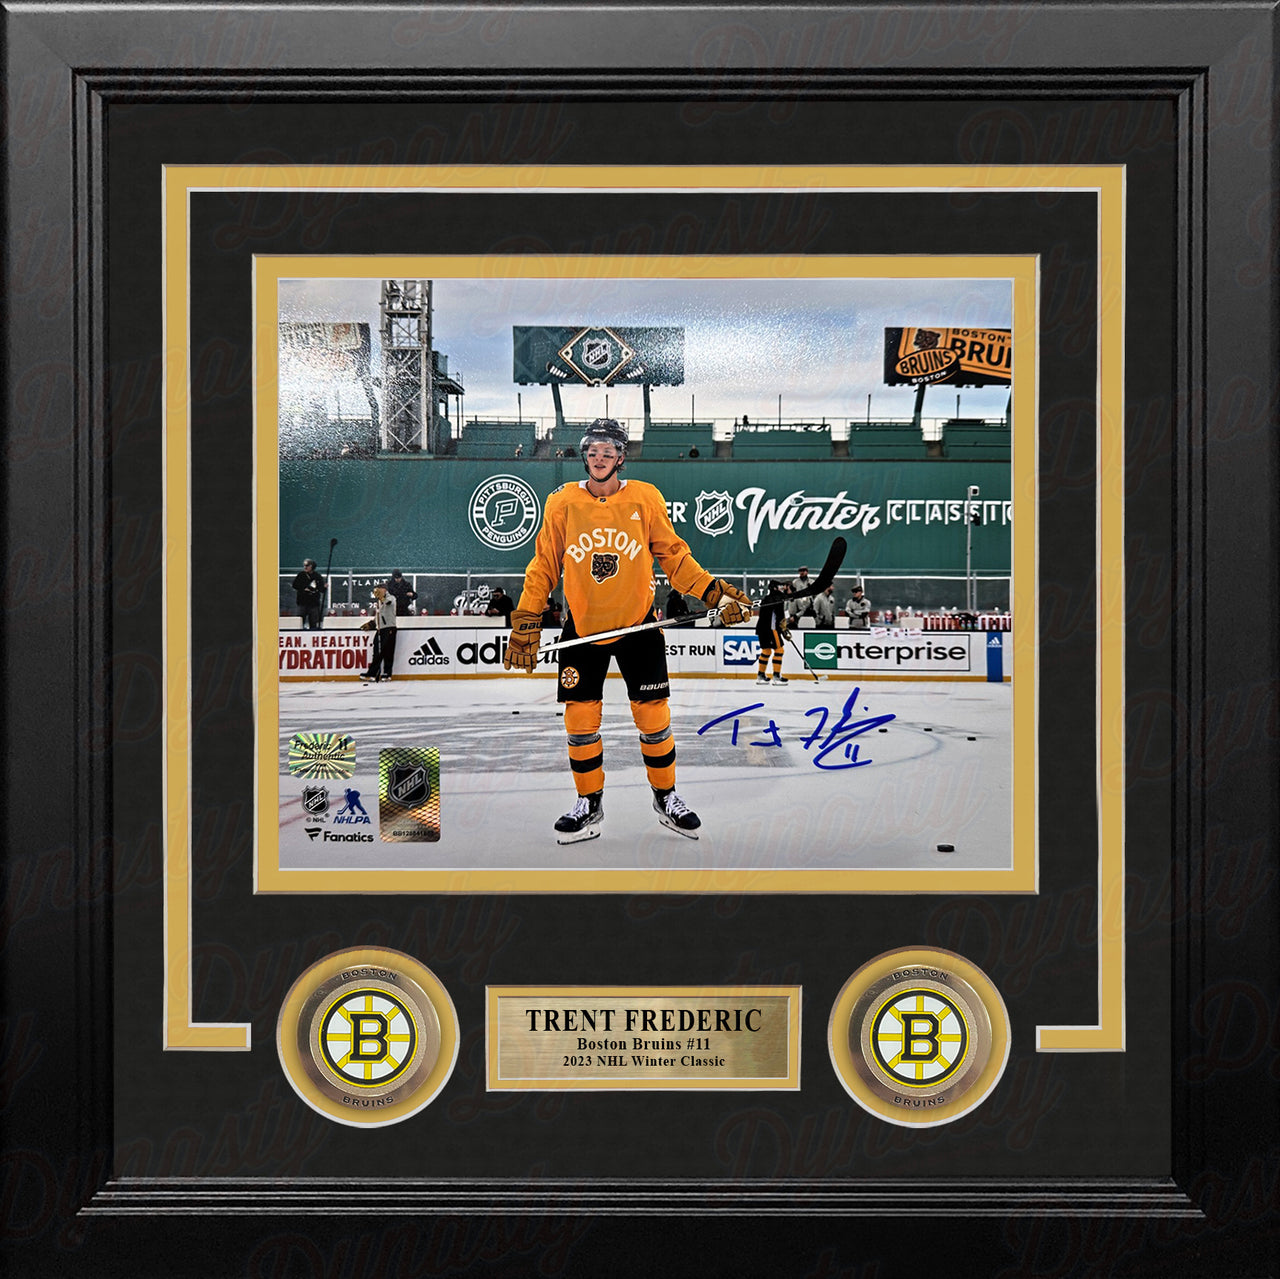 Trent Frederic Winter Classic Action Boston Bruins Autographed 8" x 10" Framed Hockey Photo